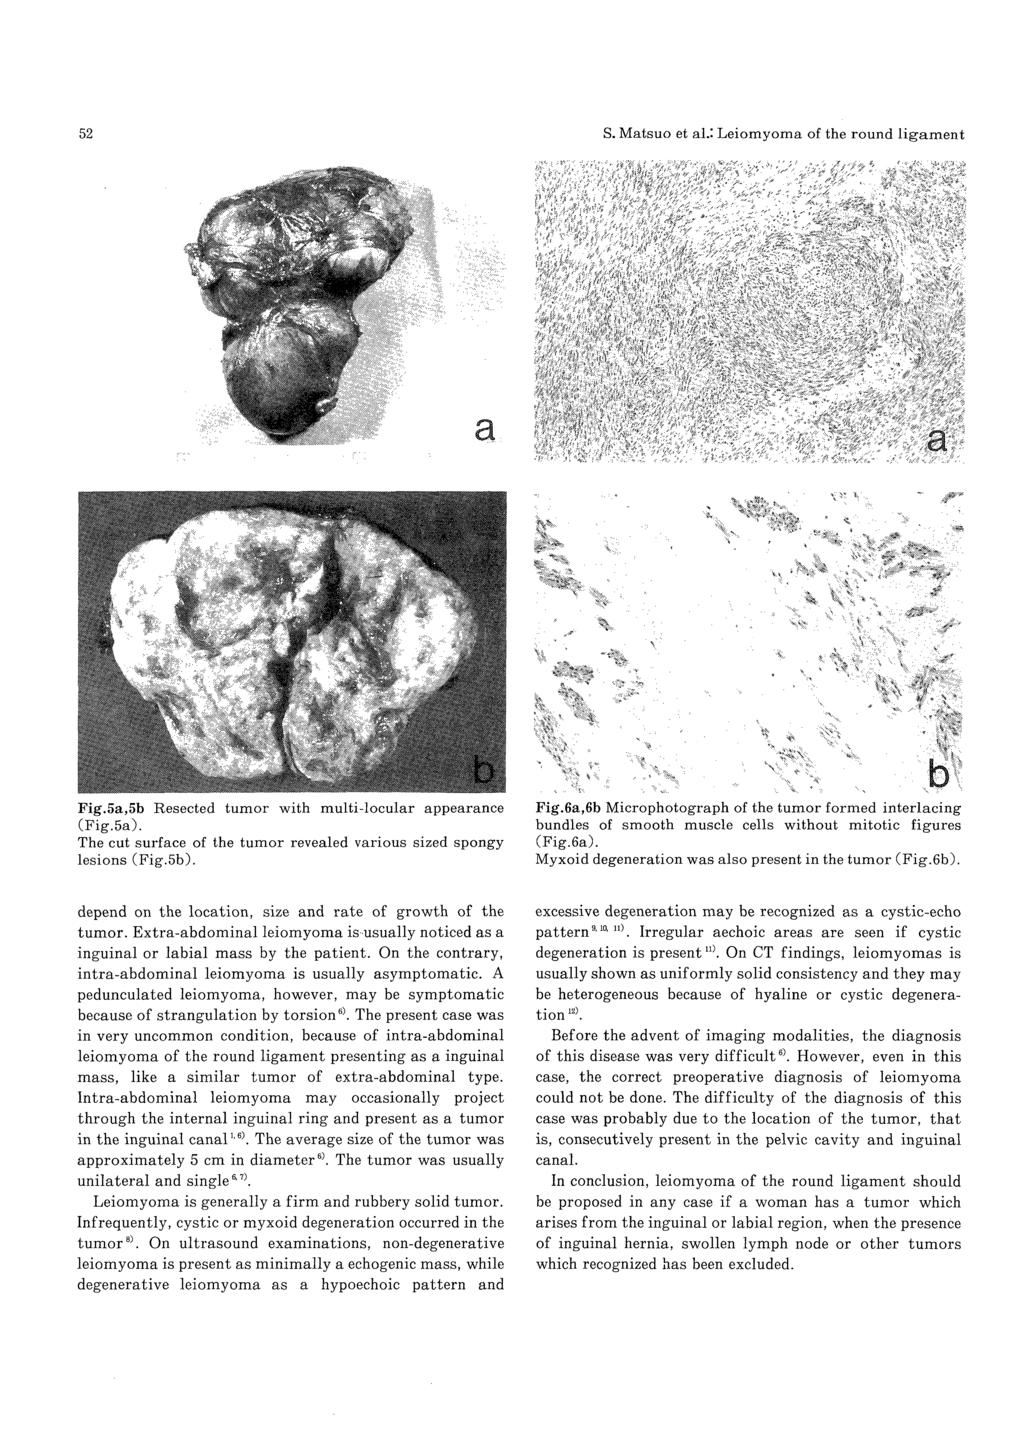 Fig.5a,5b Resected tumor with multi-locular appearance (Fig.5a). The cut surface of the tumor revealed various sized spongy lesions (Fig.5b). Fig.